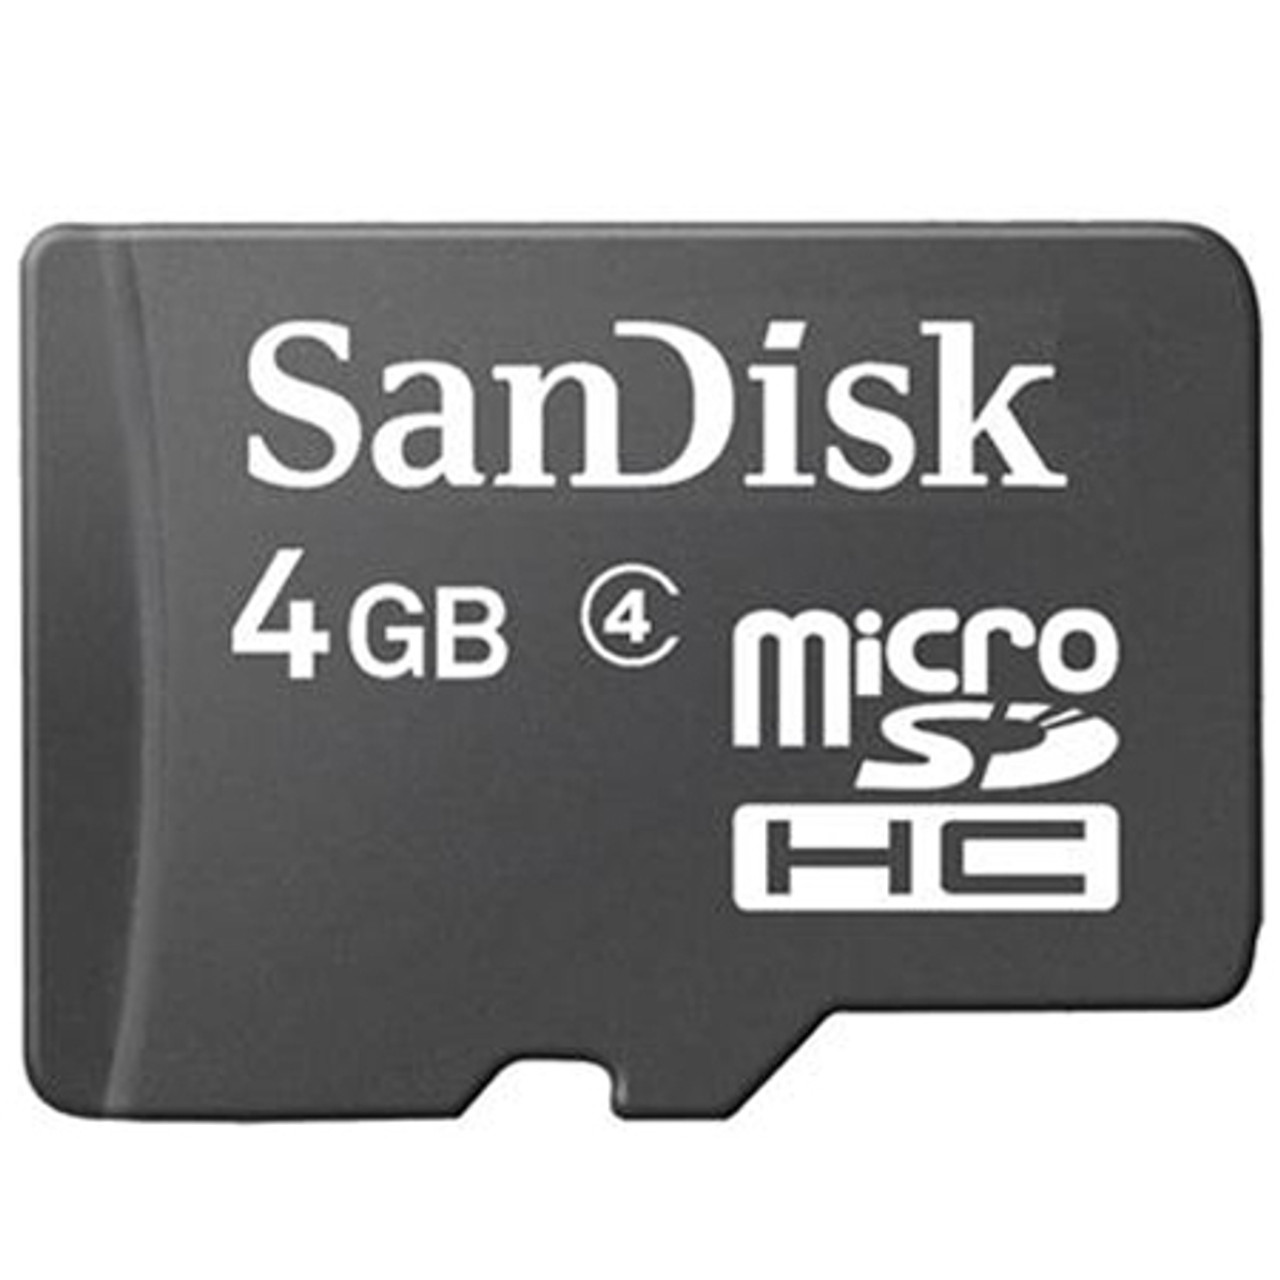 4gb Micro Sd Sandisk Class 4 Pre Loaded With Noobs Lite